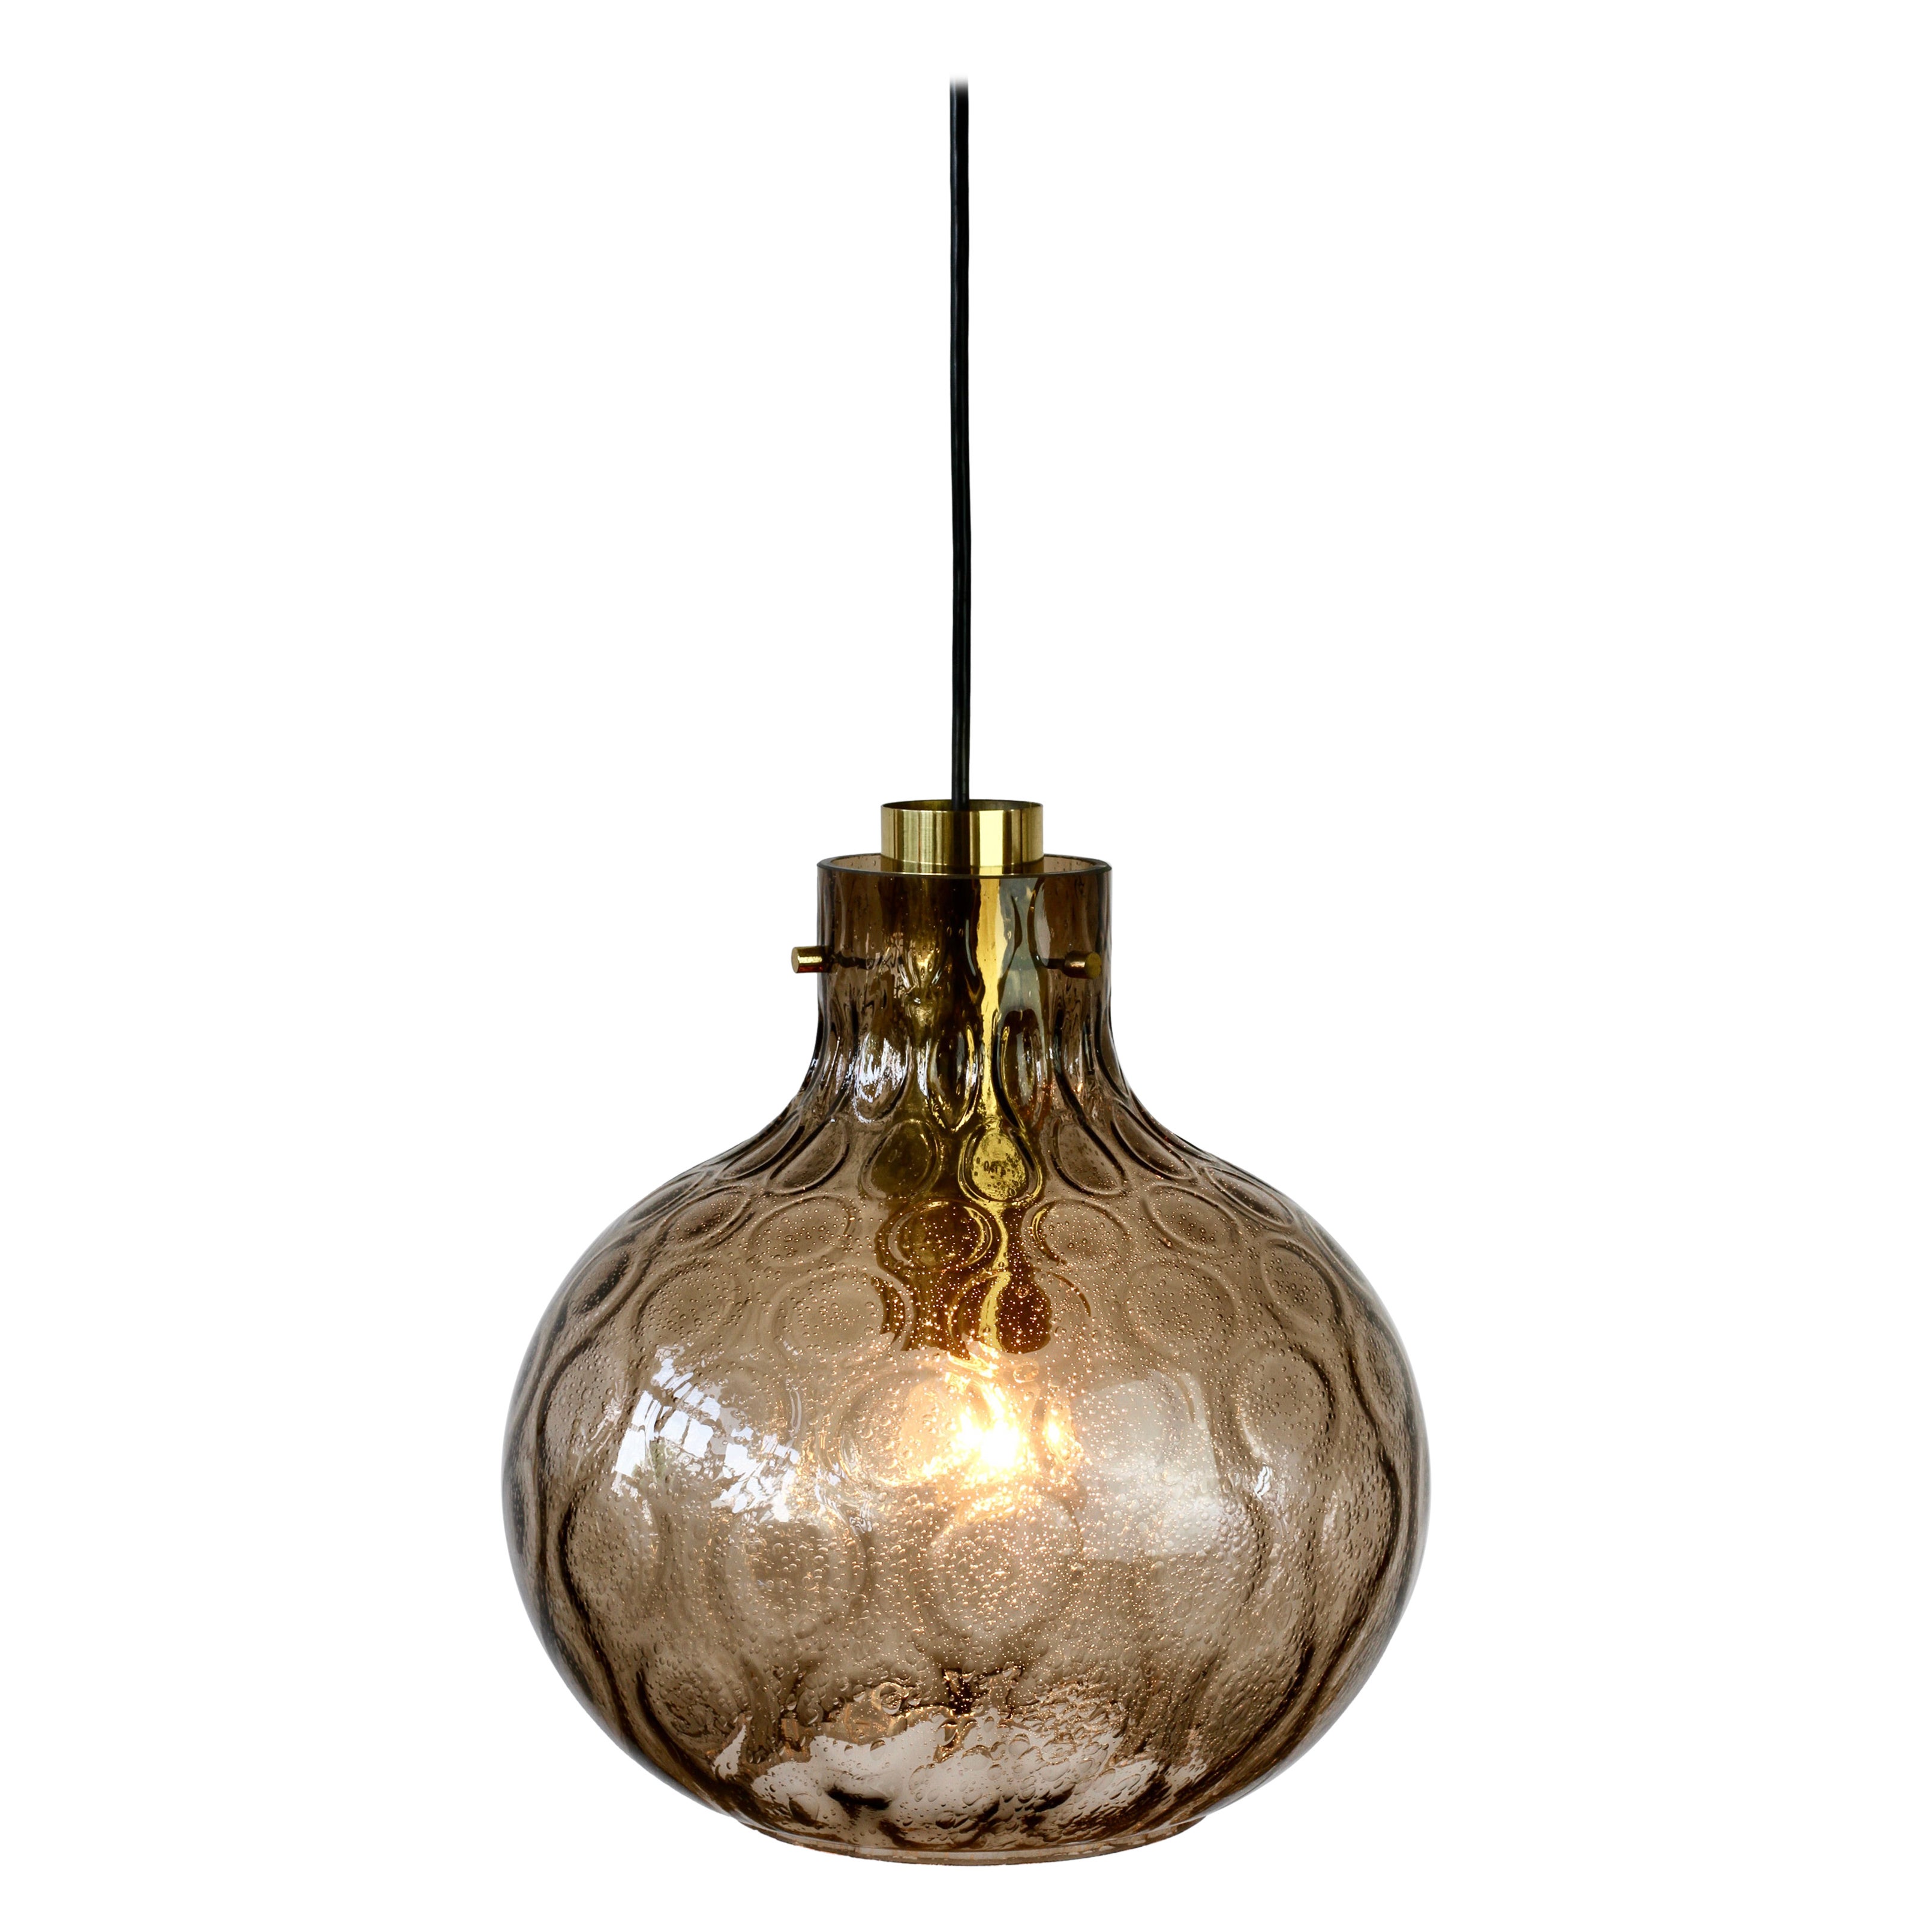 1 of 2 Large Vintage 1970s Bell Shaped Smoked Glass & Brass Globe Pendant Lights For Sale